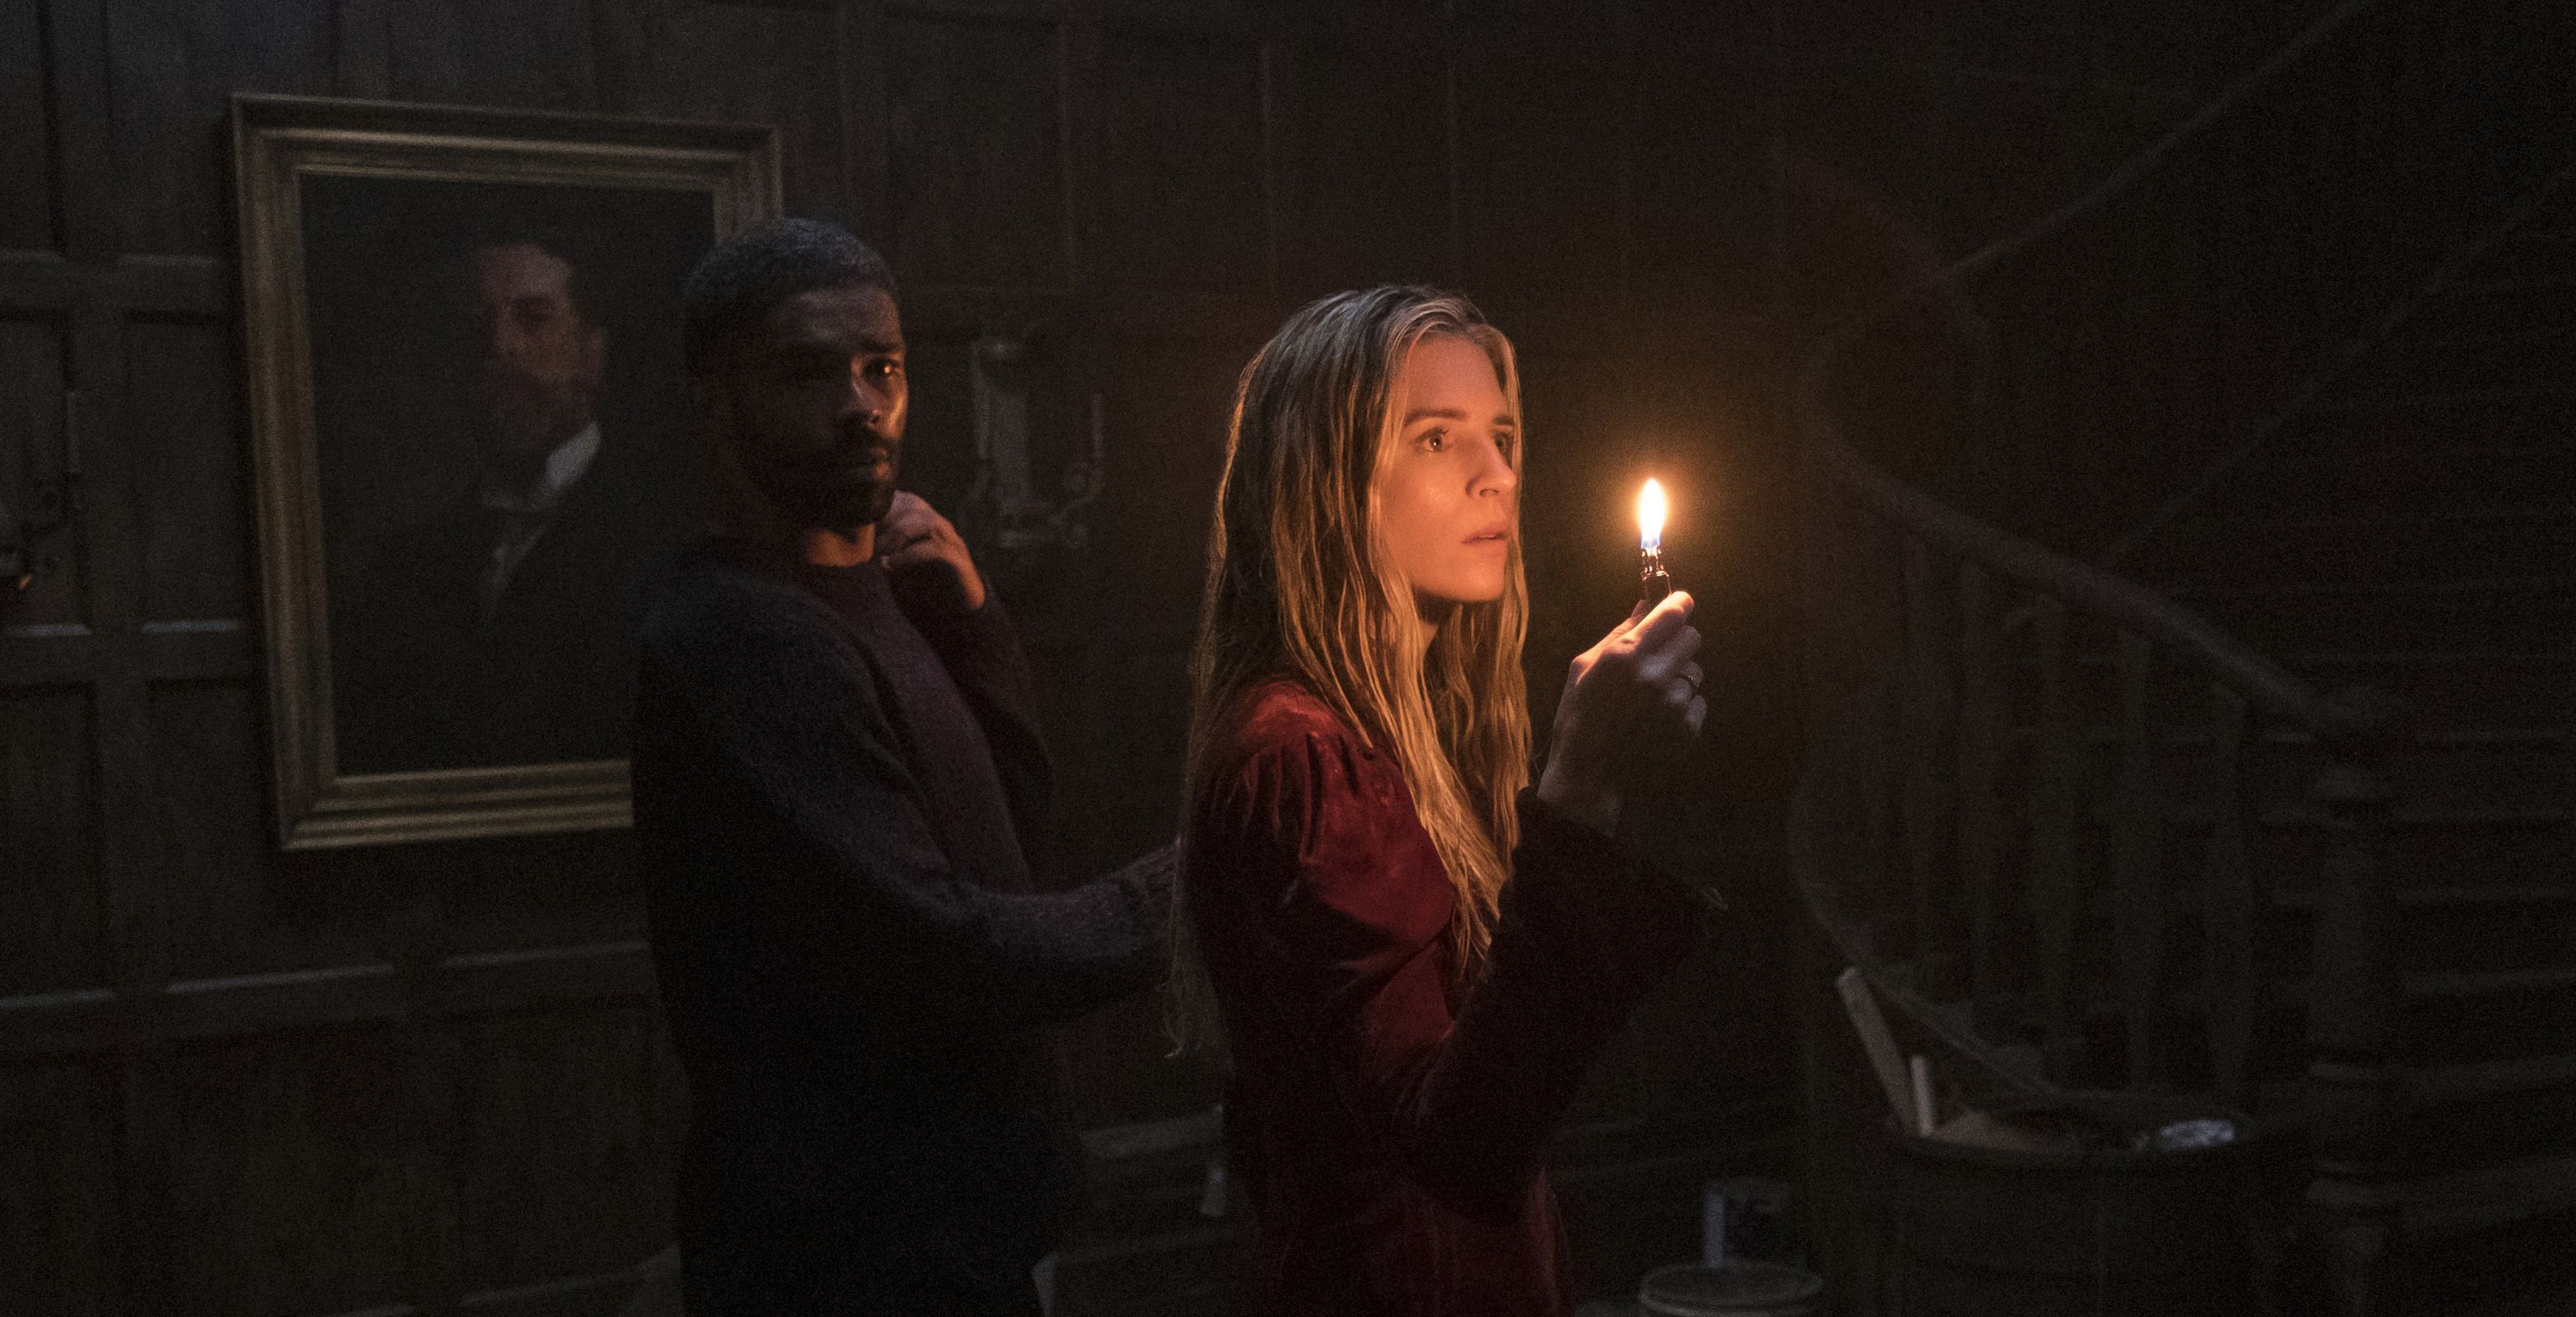 10 Burning Questions We Still Have After The OA Season 2 Finale